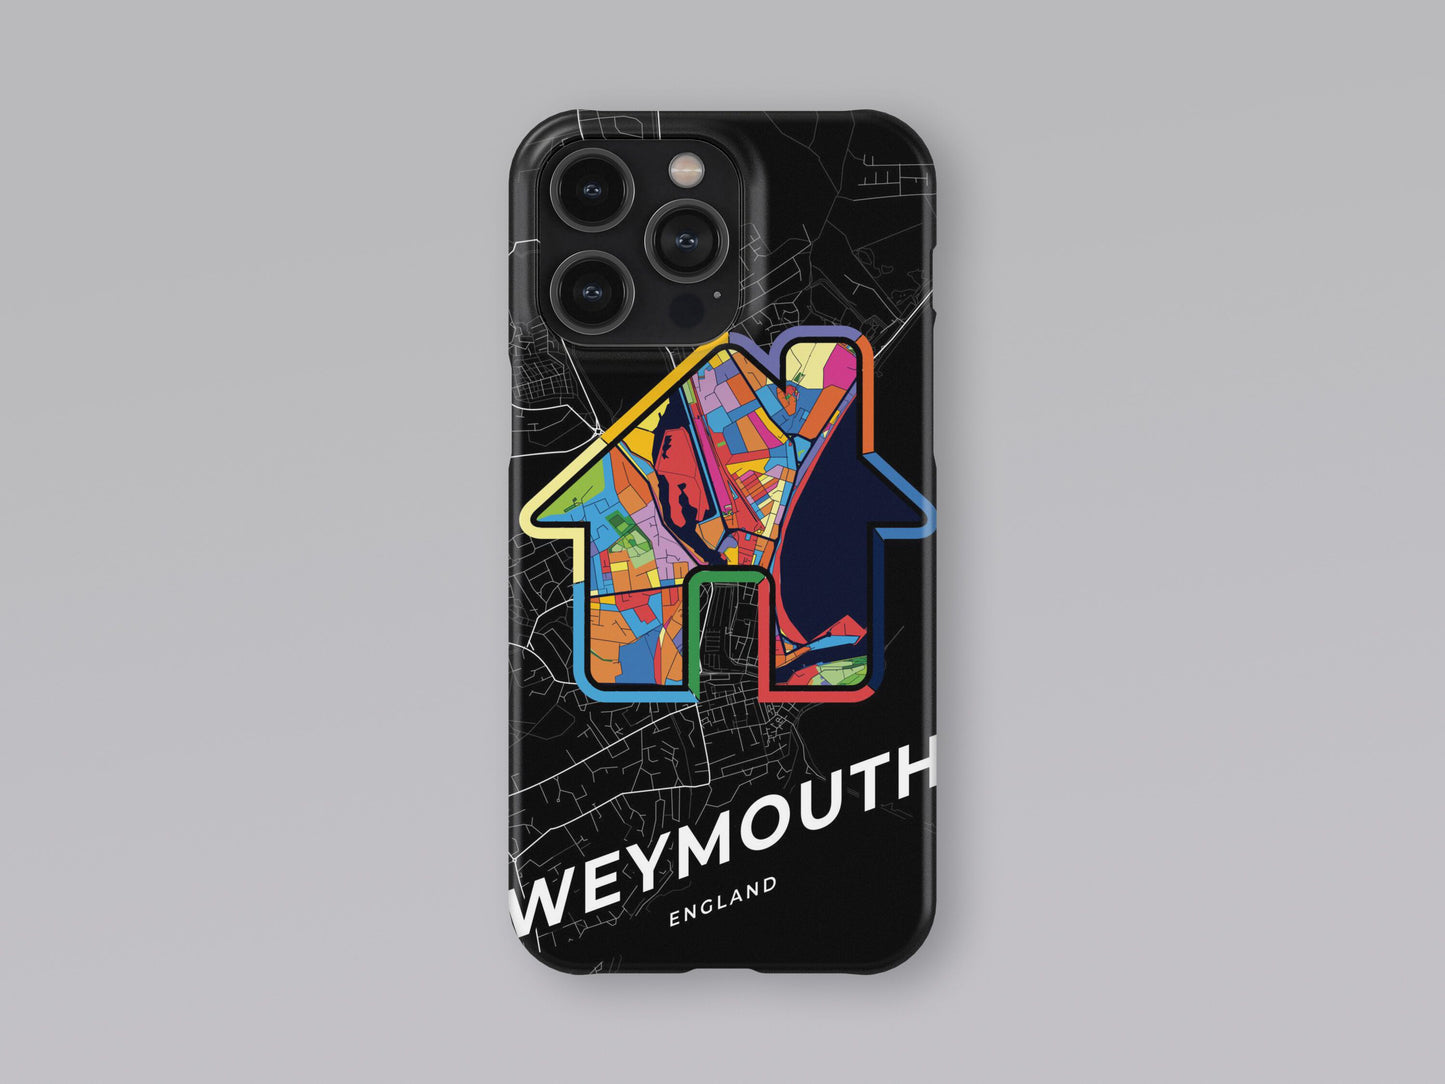 Weymouth England slim phone case with colorful icon 3